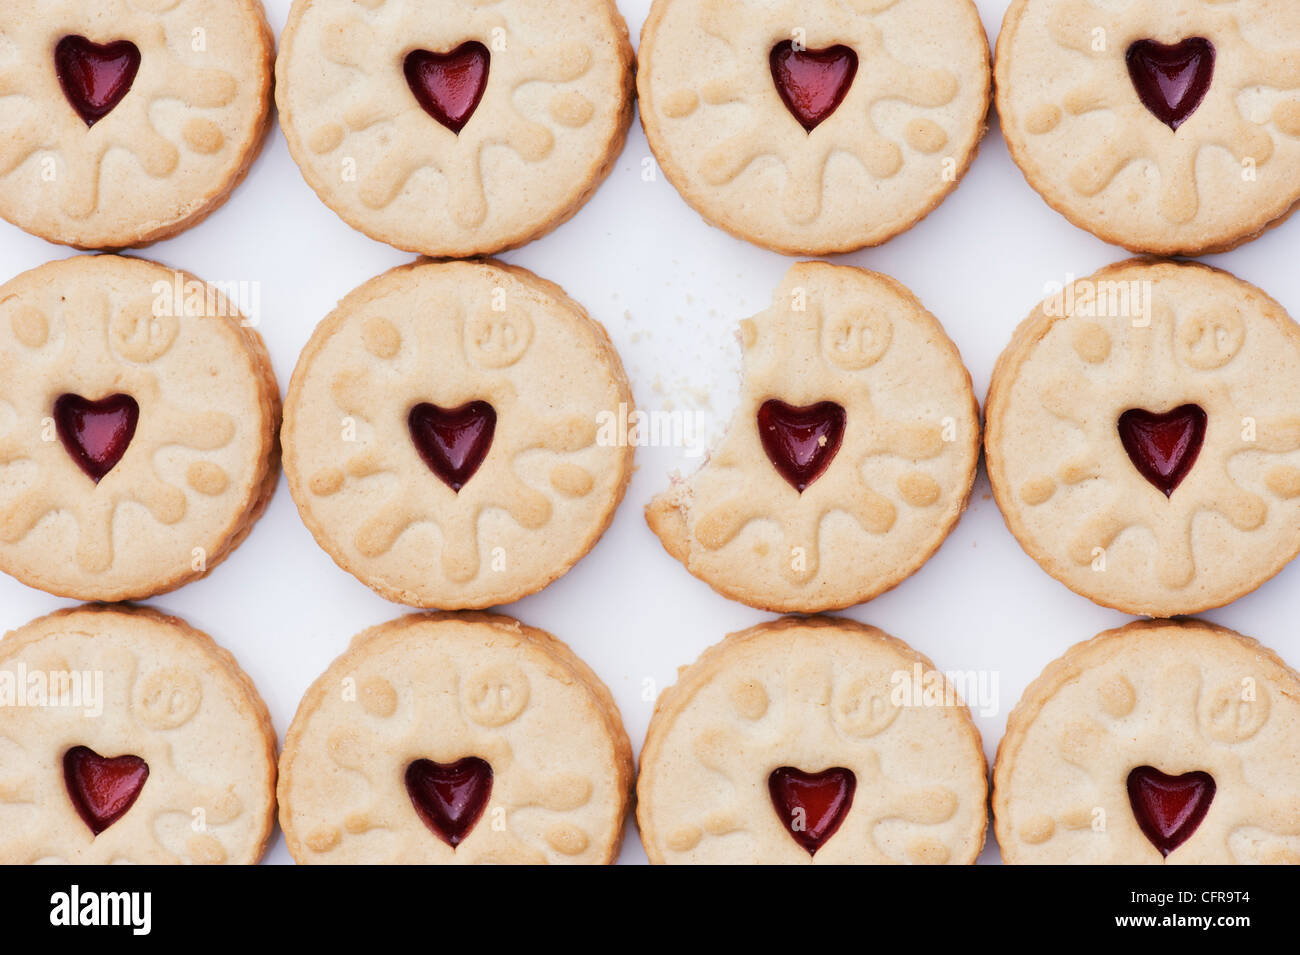 Jammy Dodgers biscuit pattern Stock Photo